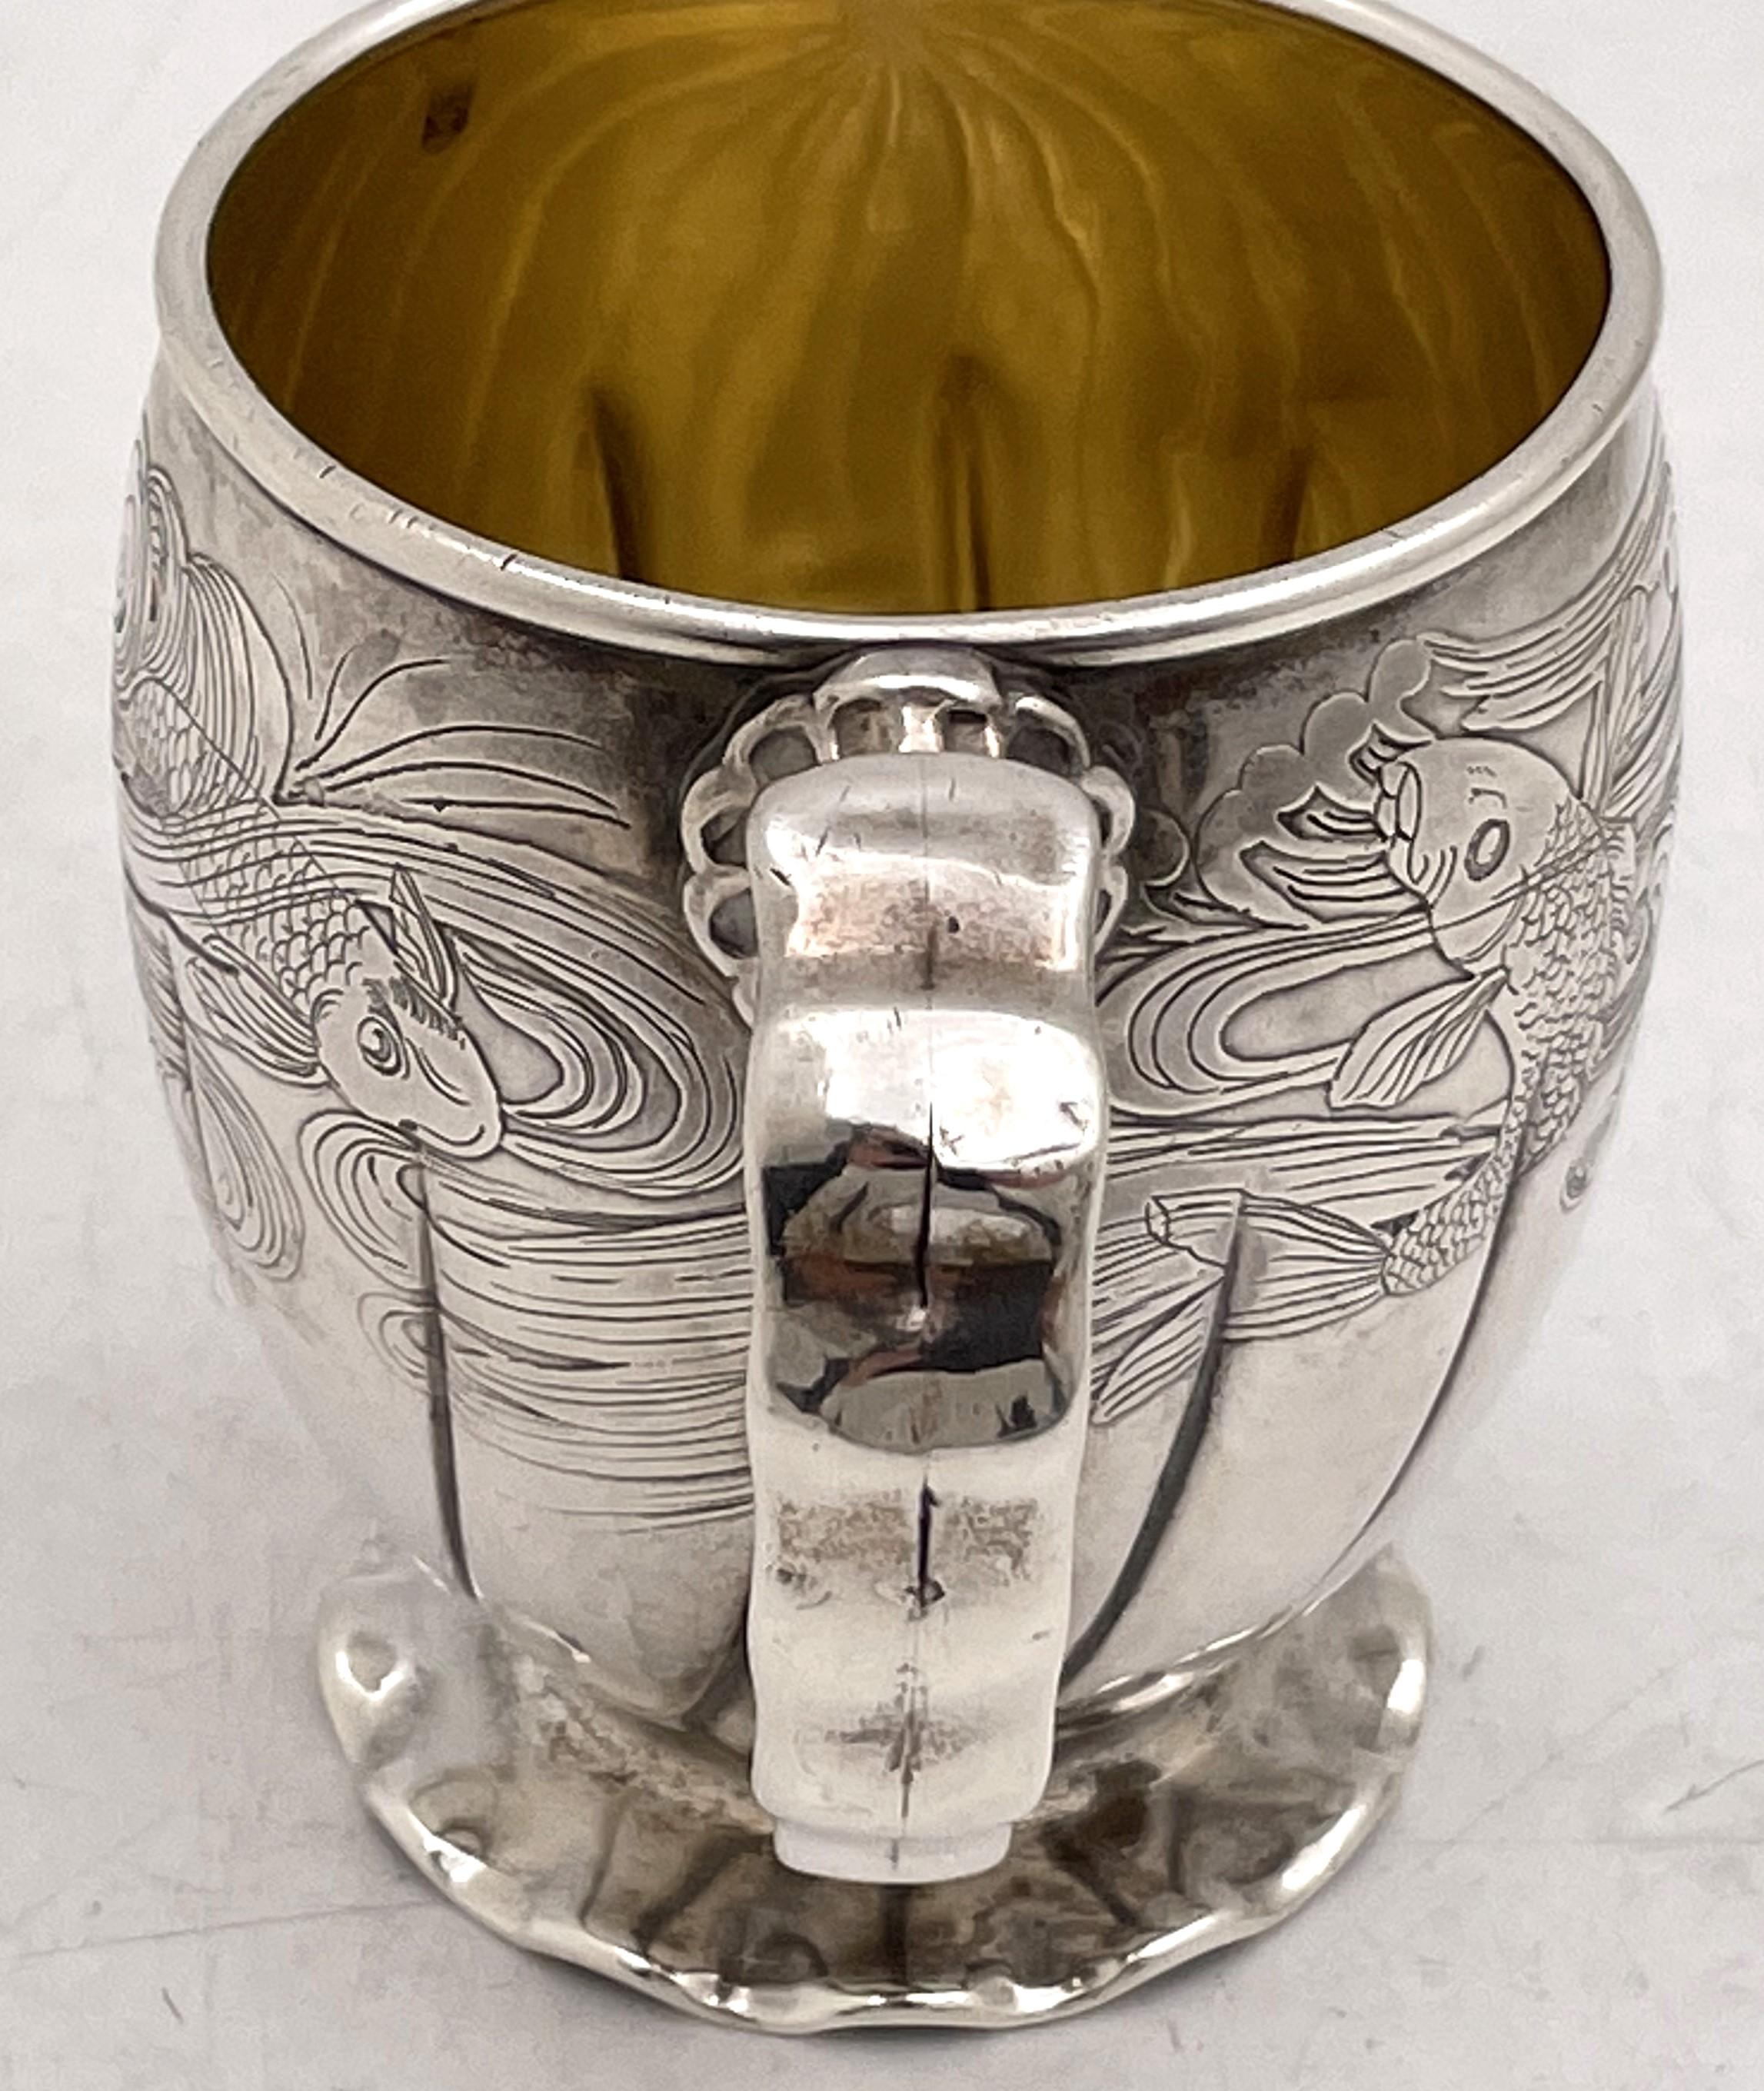 Gorham 1880 Sterling Silver Etched Child's Christening Mug with Aquatic Motifs In Good Condition For Sale In New York, NY